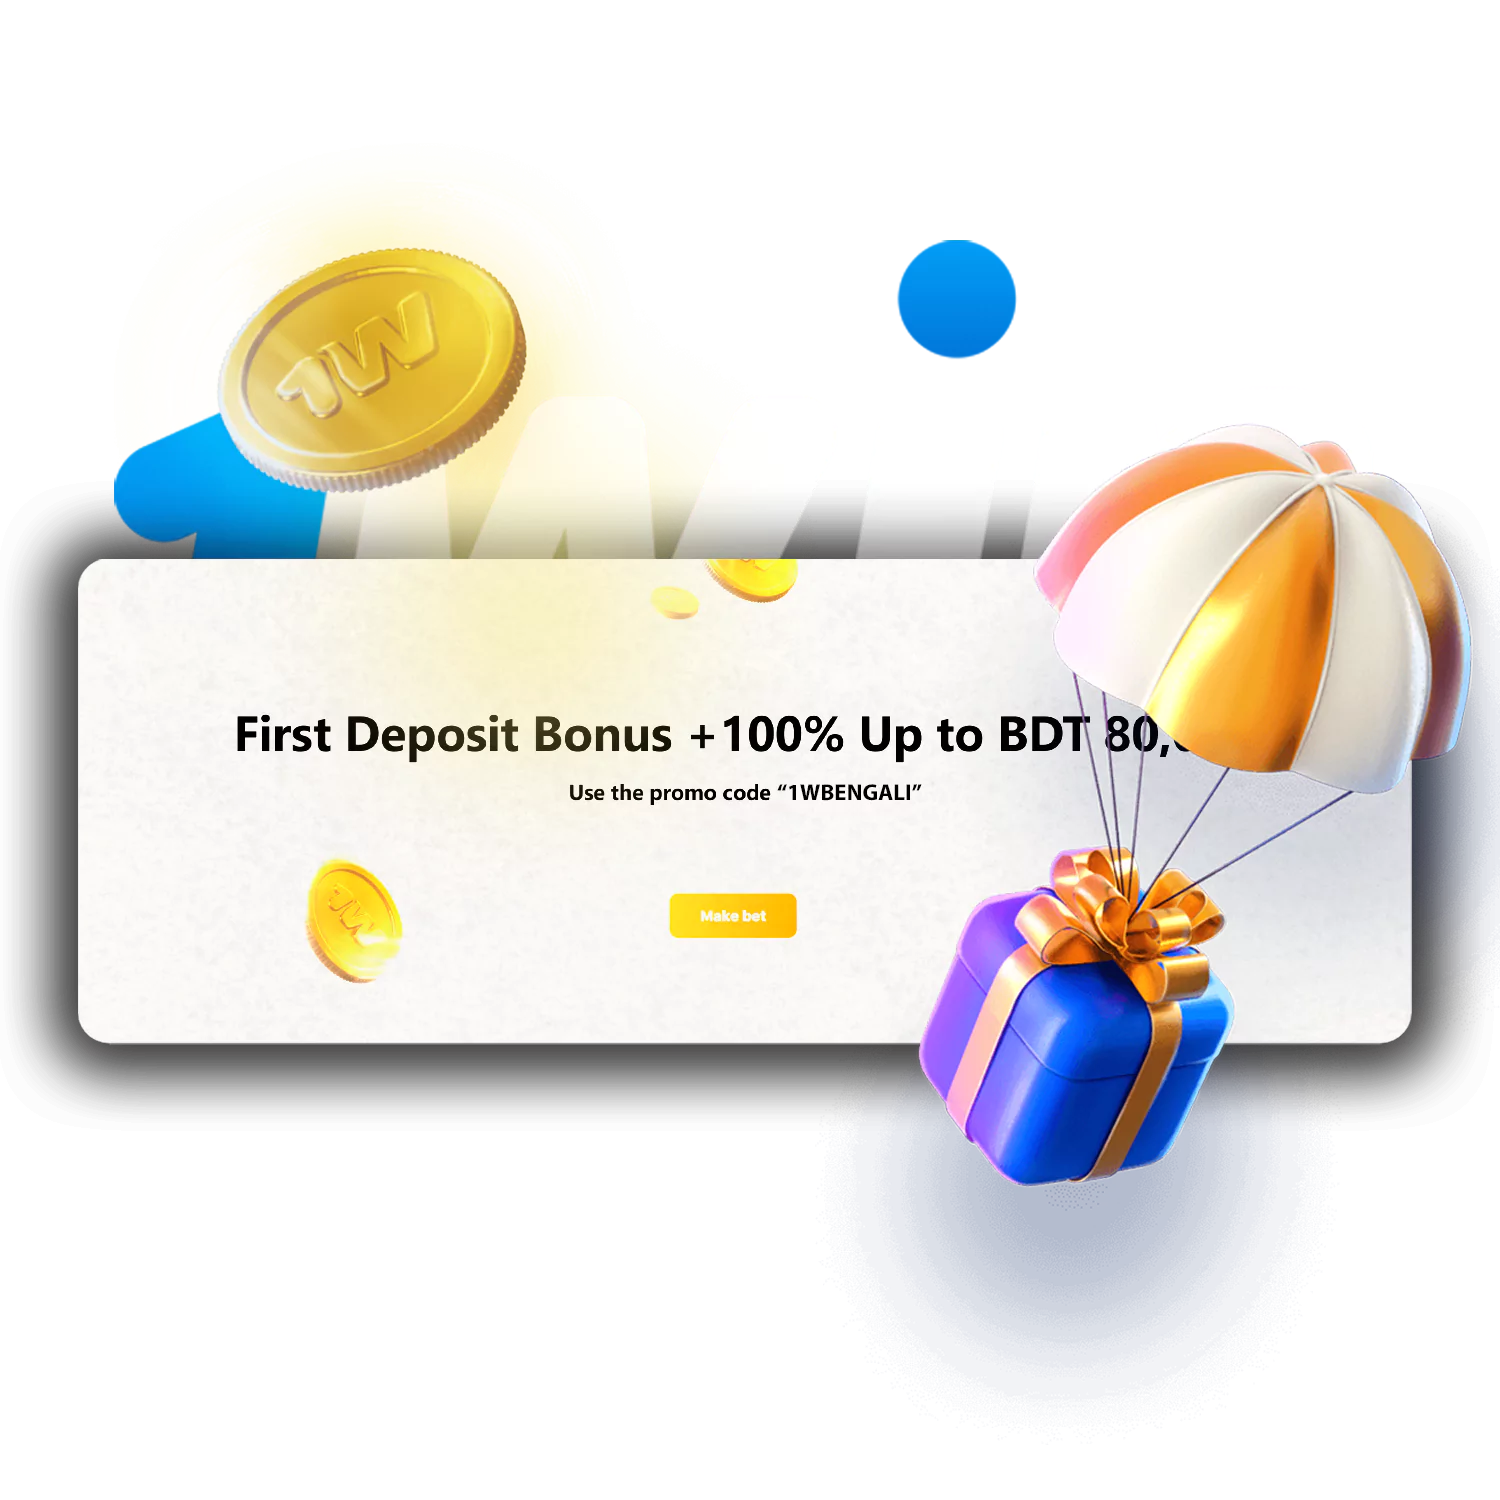 Find out about bonus programs and promotions available for users of 1win.